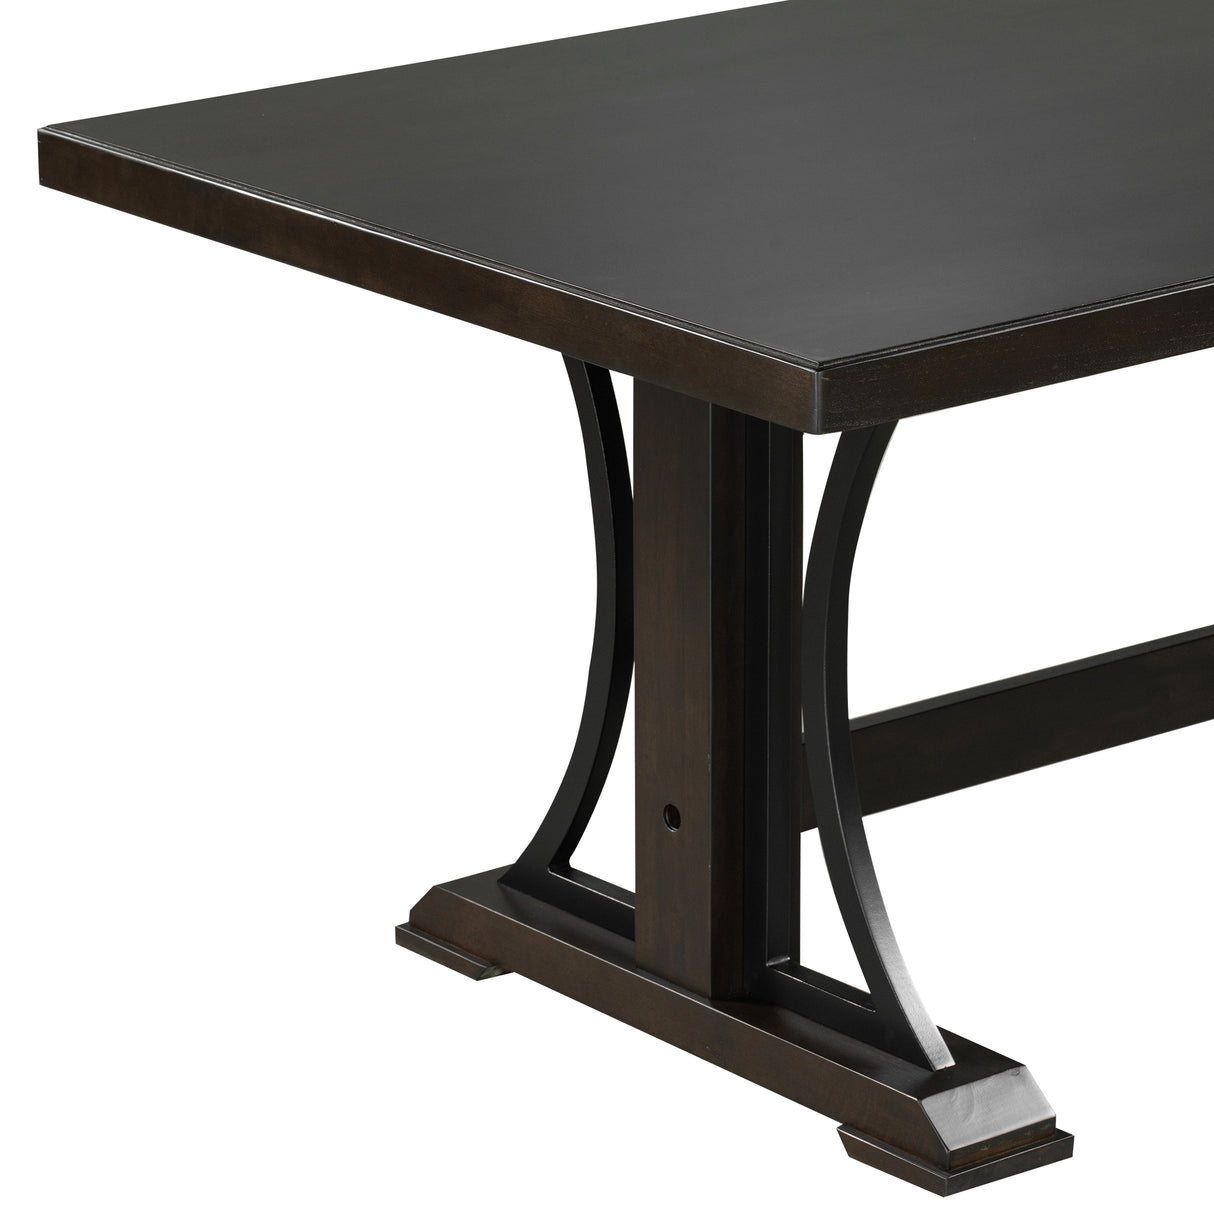 TREXM Retro Style Dining Table 78” Wood Rectangular Table, Seats up to 8 (Espresso) - Home Elegance USA